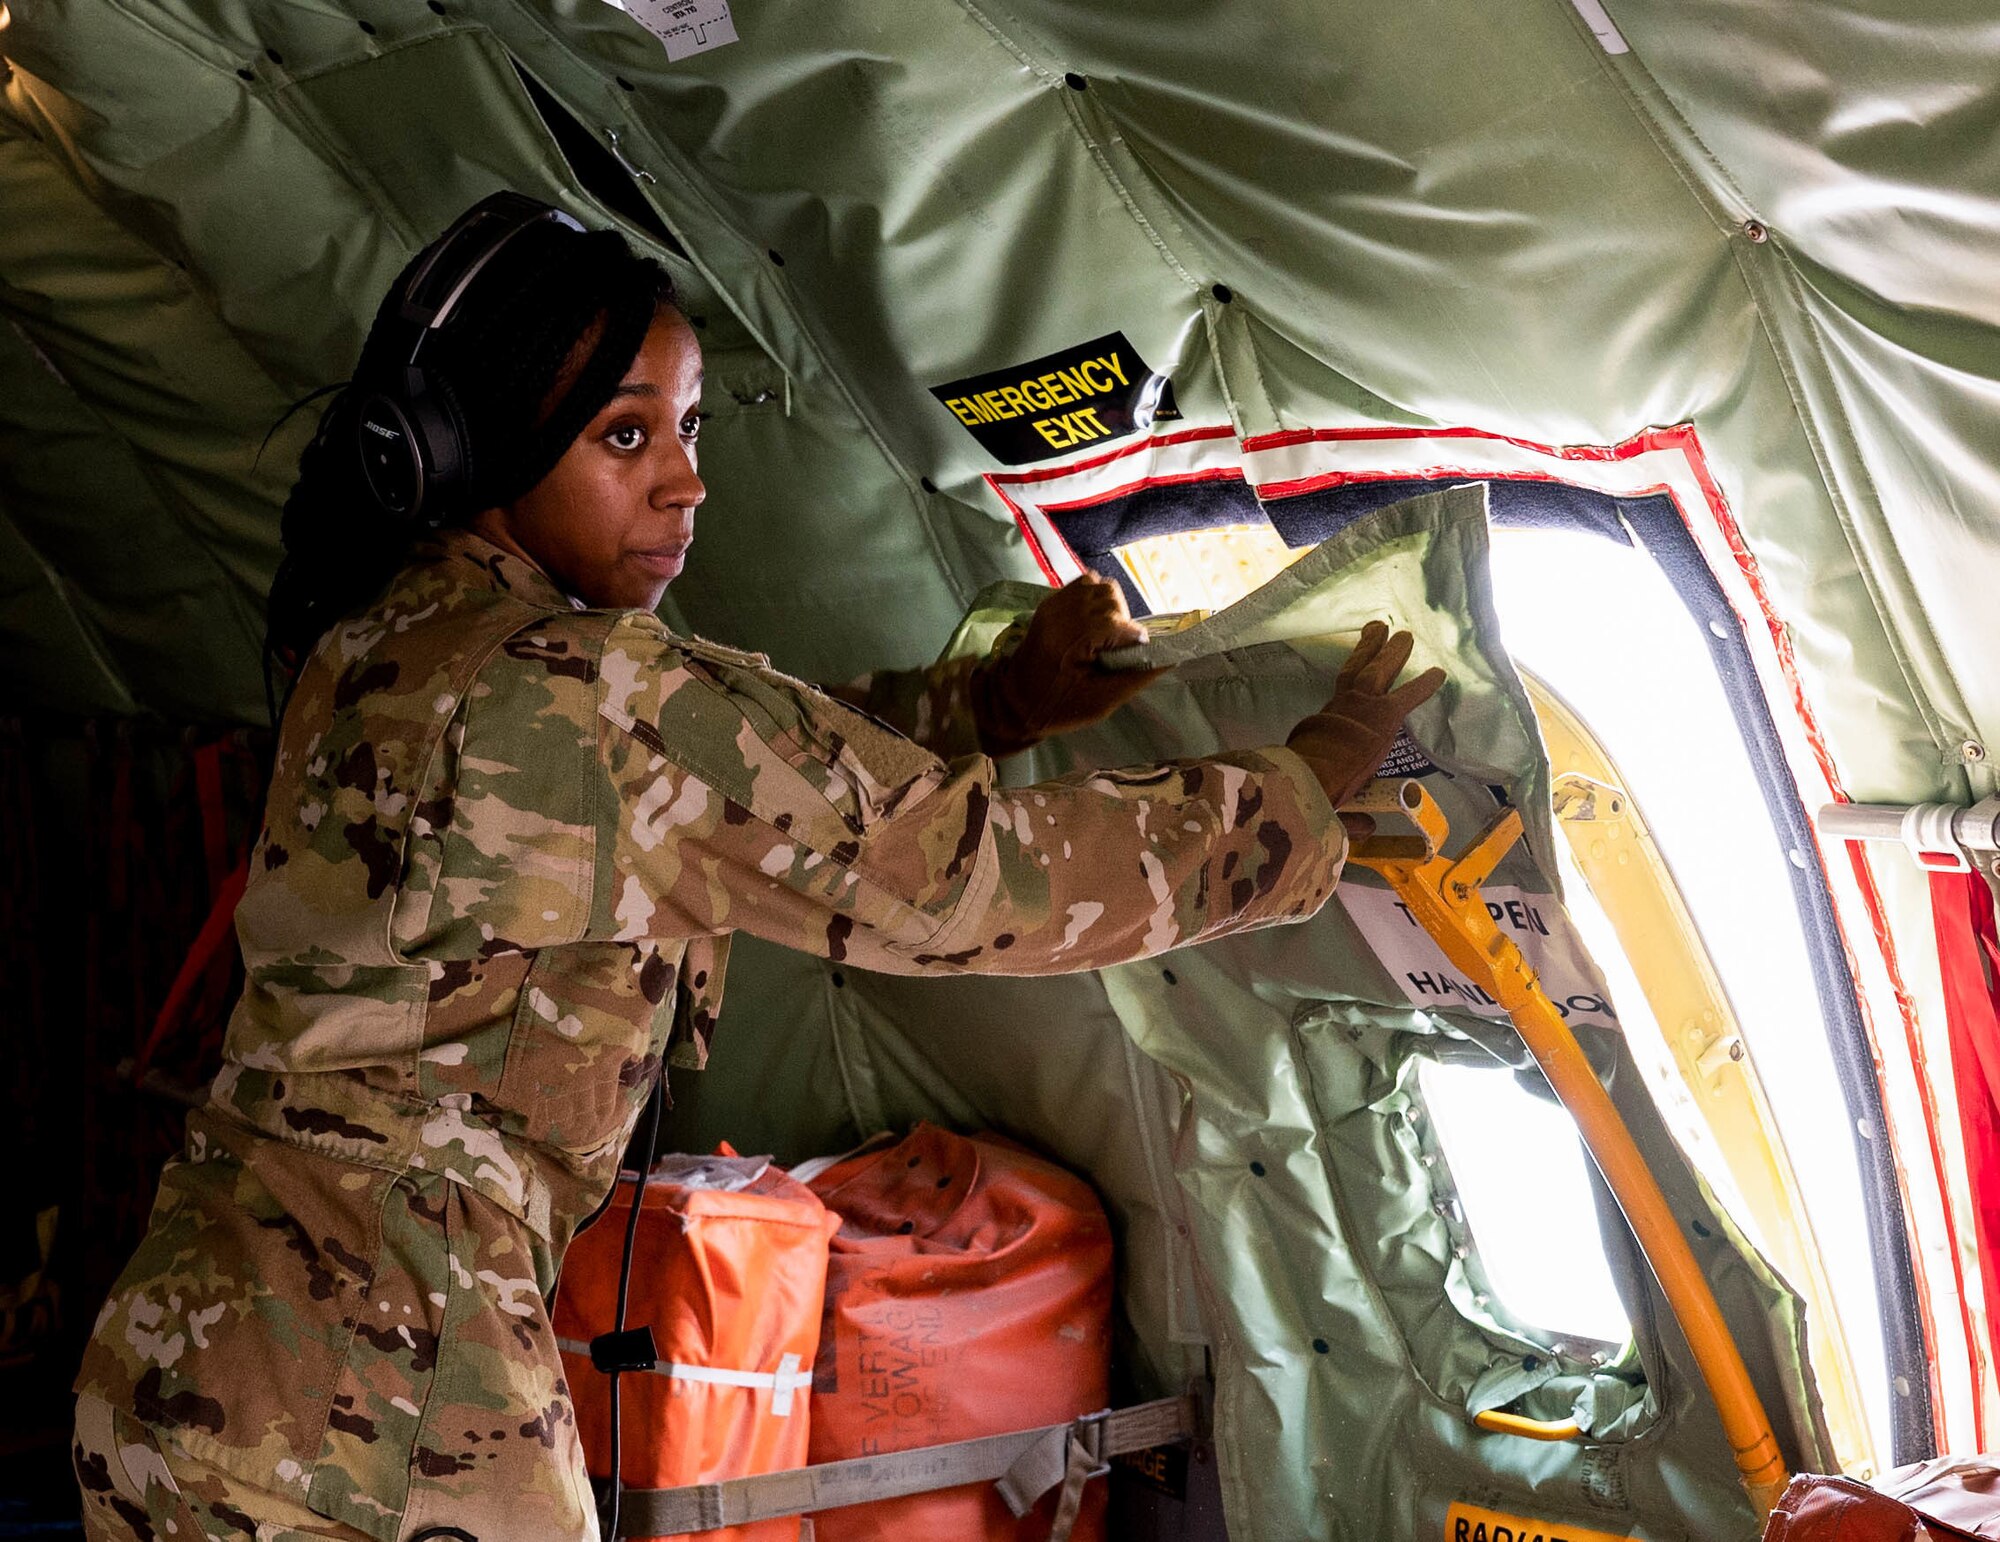 Airman 1st Class Lahjahniek Ramdene, 340th Expeditionary Air Refueling Squadron aerial refueling specialist, secures an aircrew escape hatch on a KC-135 Stratotanker before a Bomber Task Force mission, at Al Udeid Air Base, Qatar, Sept 4, 2022. BTF missions demonstrate the U.S.’s commitment to regional security and stability by showing how the U.S. will decisively respond to threats against U.S., coalition and partner forces.  (U.S. Air Force photo by Staff Sgt. Dana Tourtellotte)